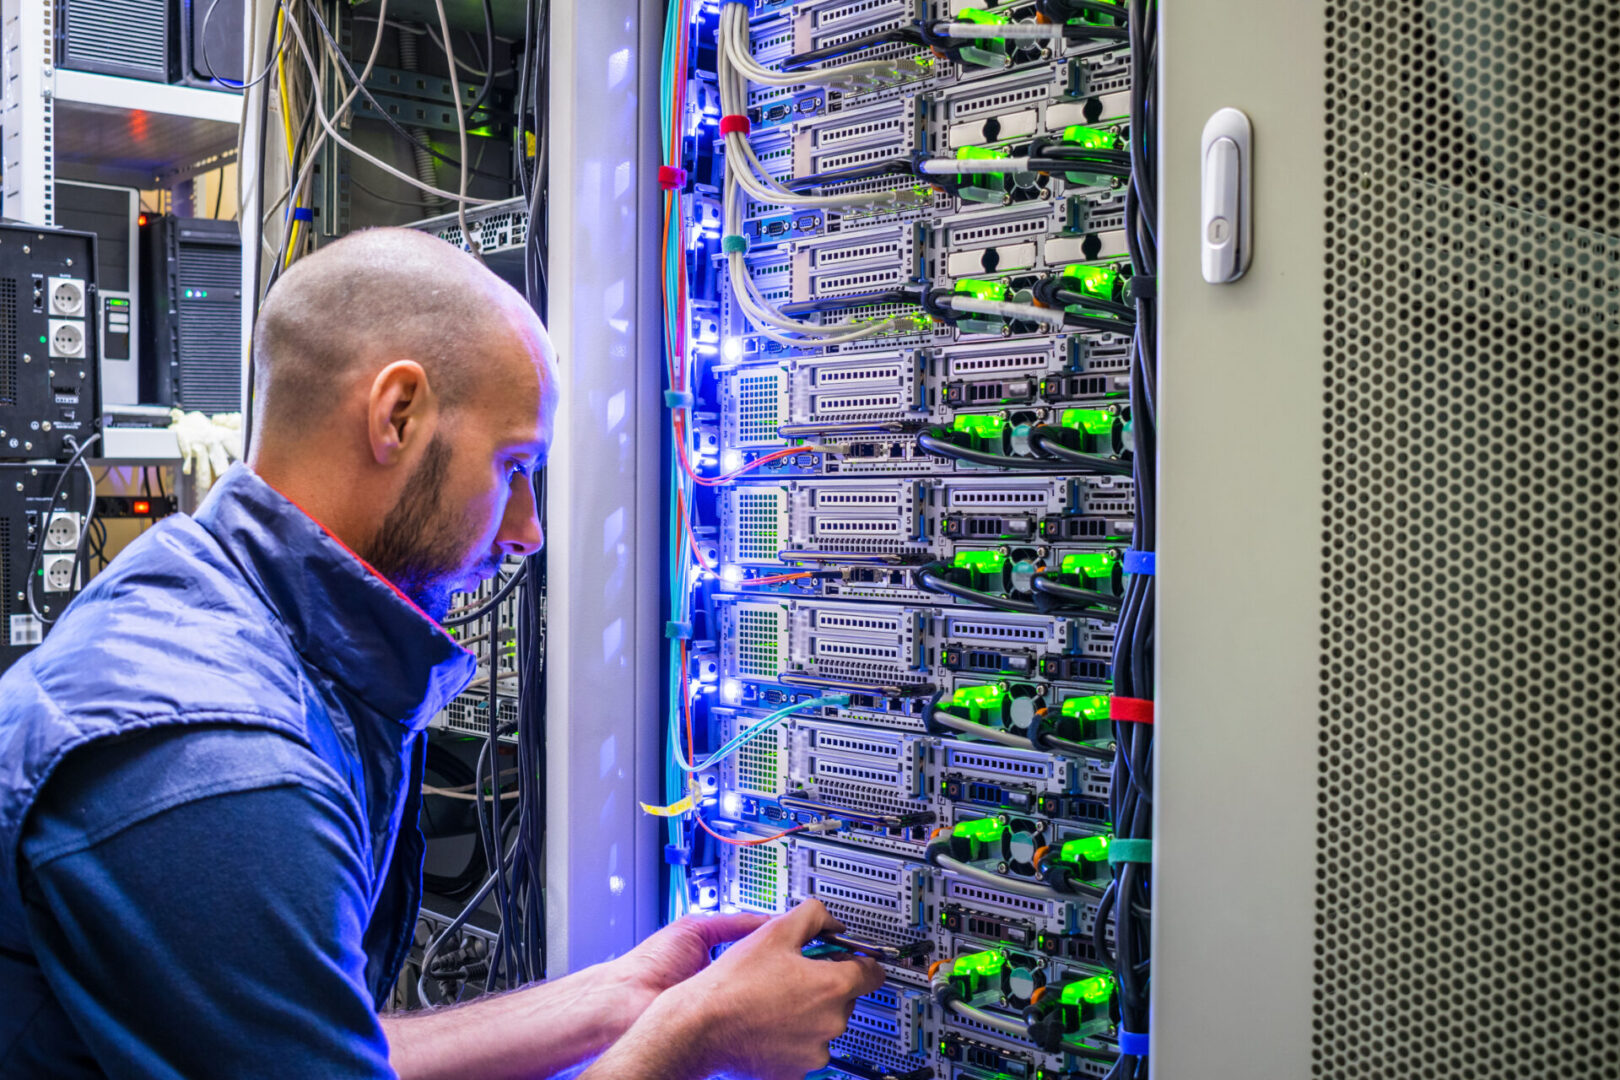 A man works with telecommunications. The technician switches the Internet cable of the powerful routers. A specialist connects the wires in the server room of the data center.